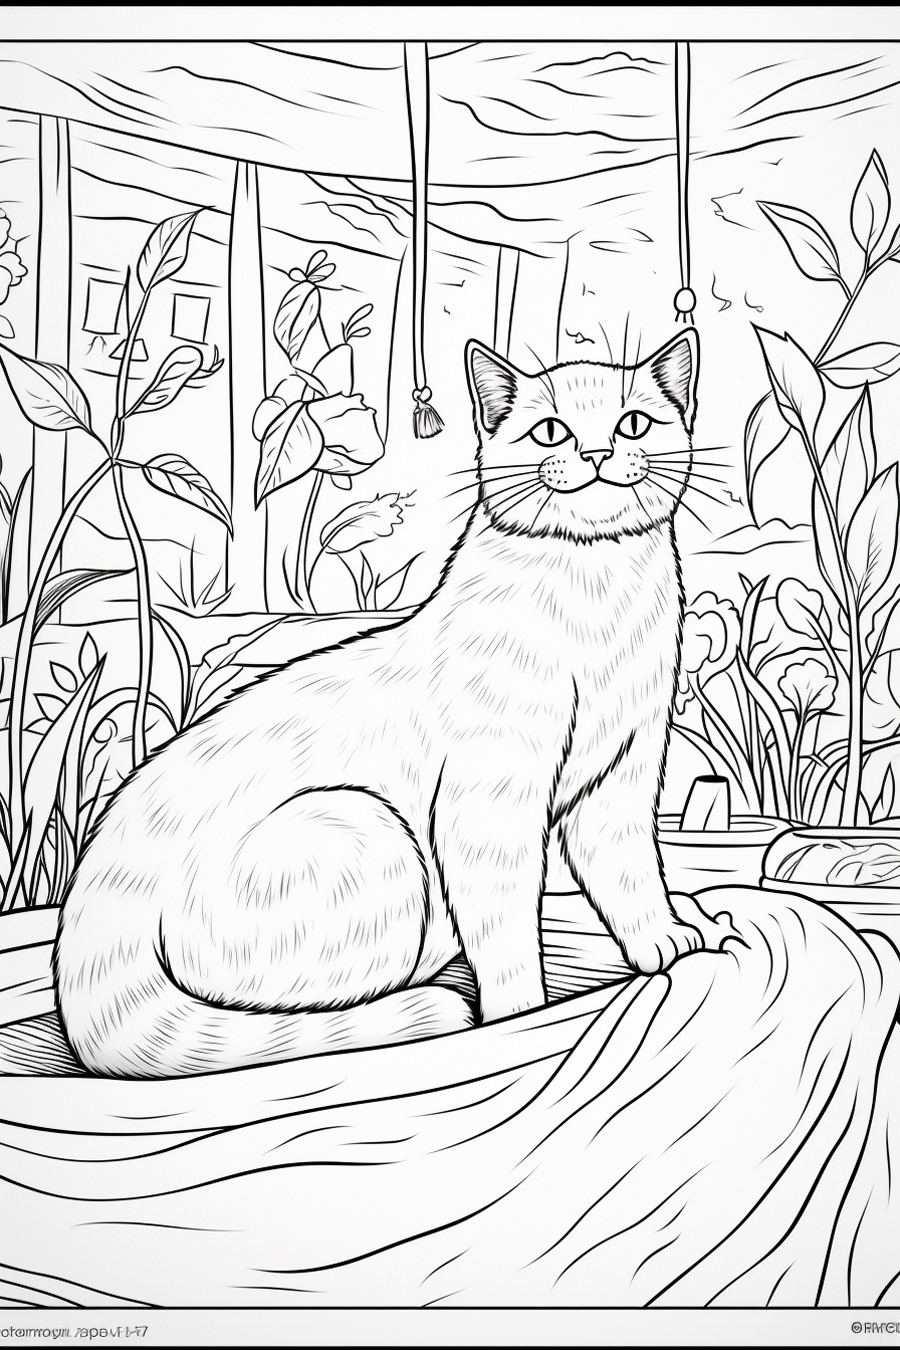 An image of a cat sitting in the water coloring page.